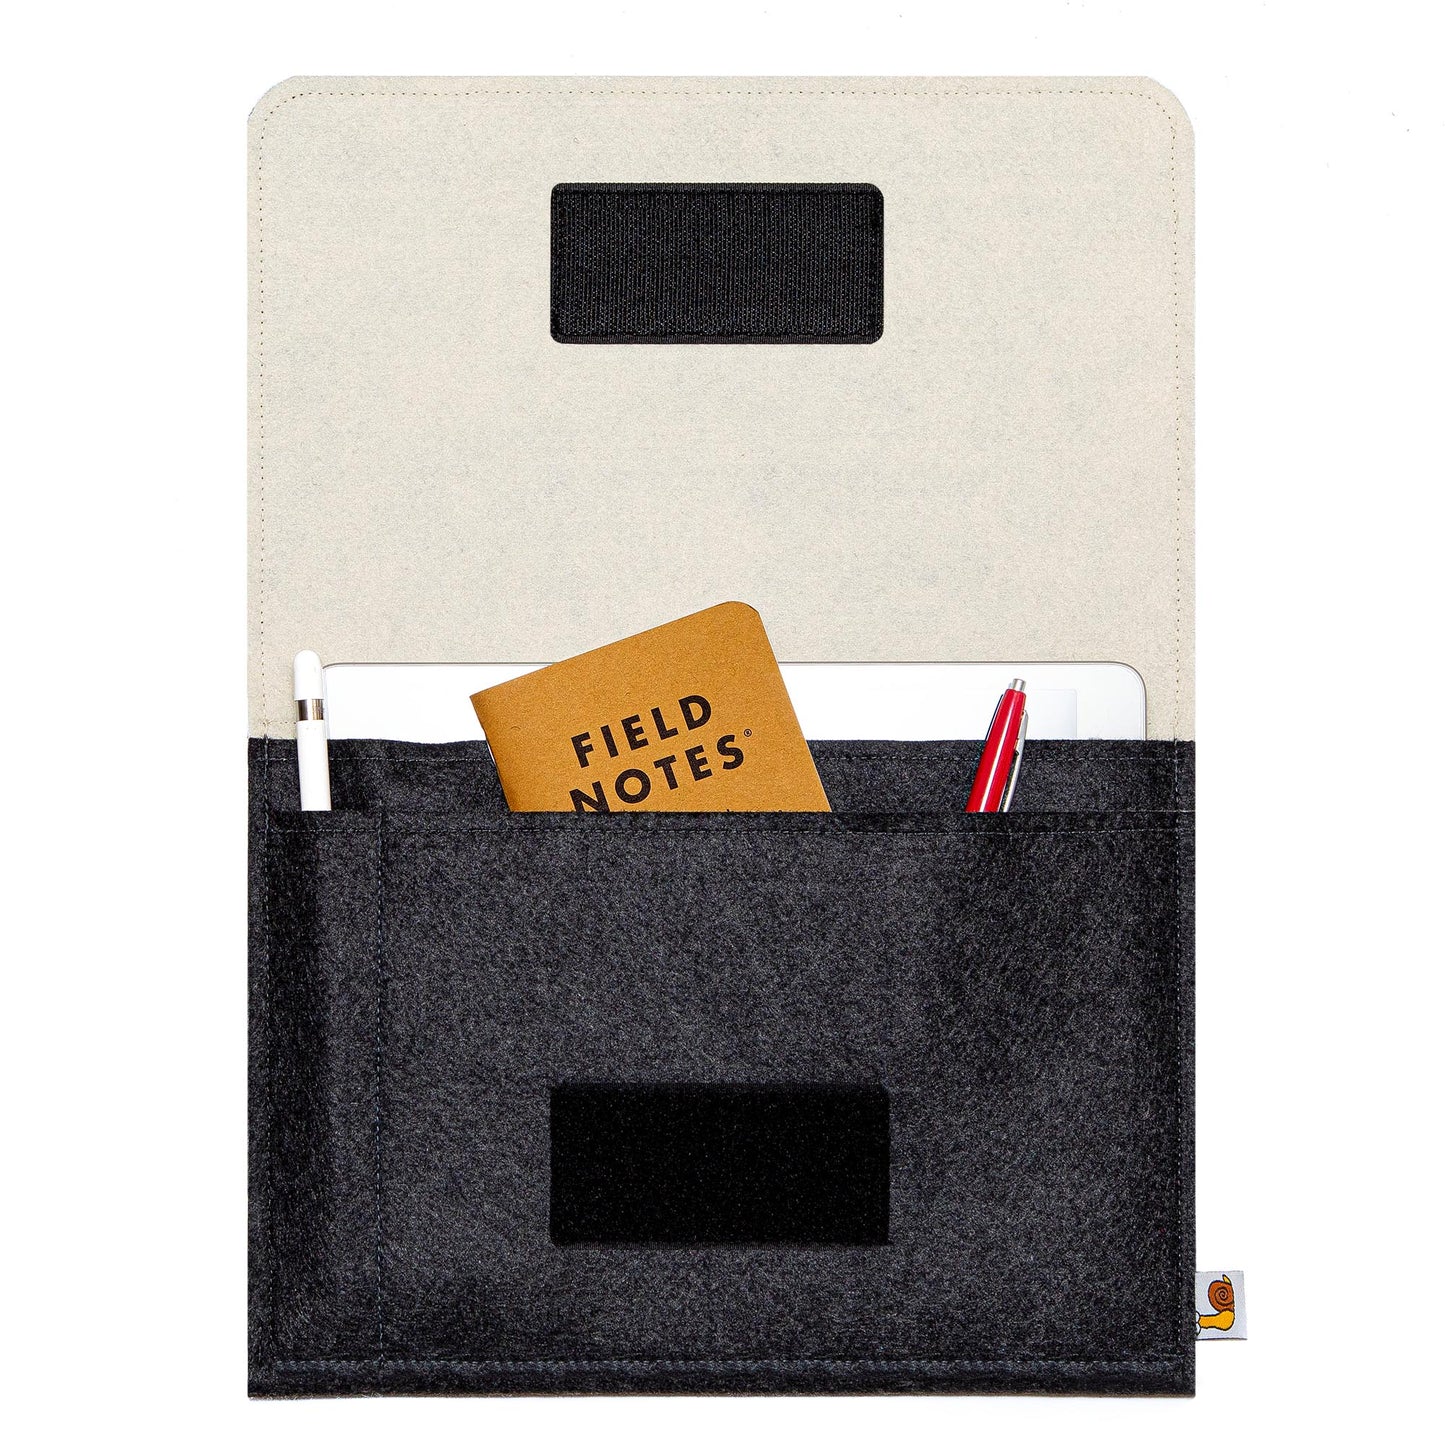 Premium Felt iPad Cover: Ultimate Protection with Accessories Pocket - Charcoal & Cream